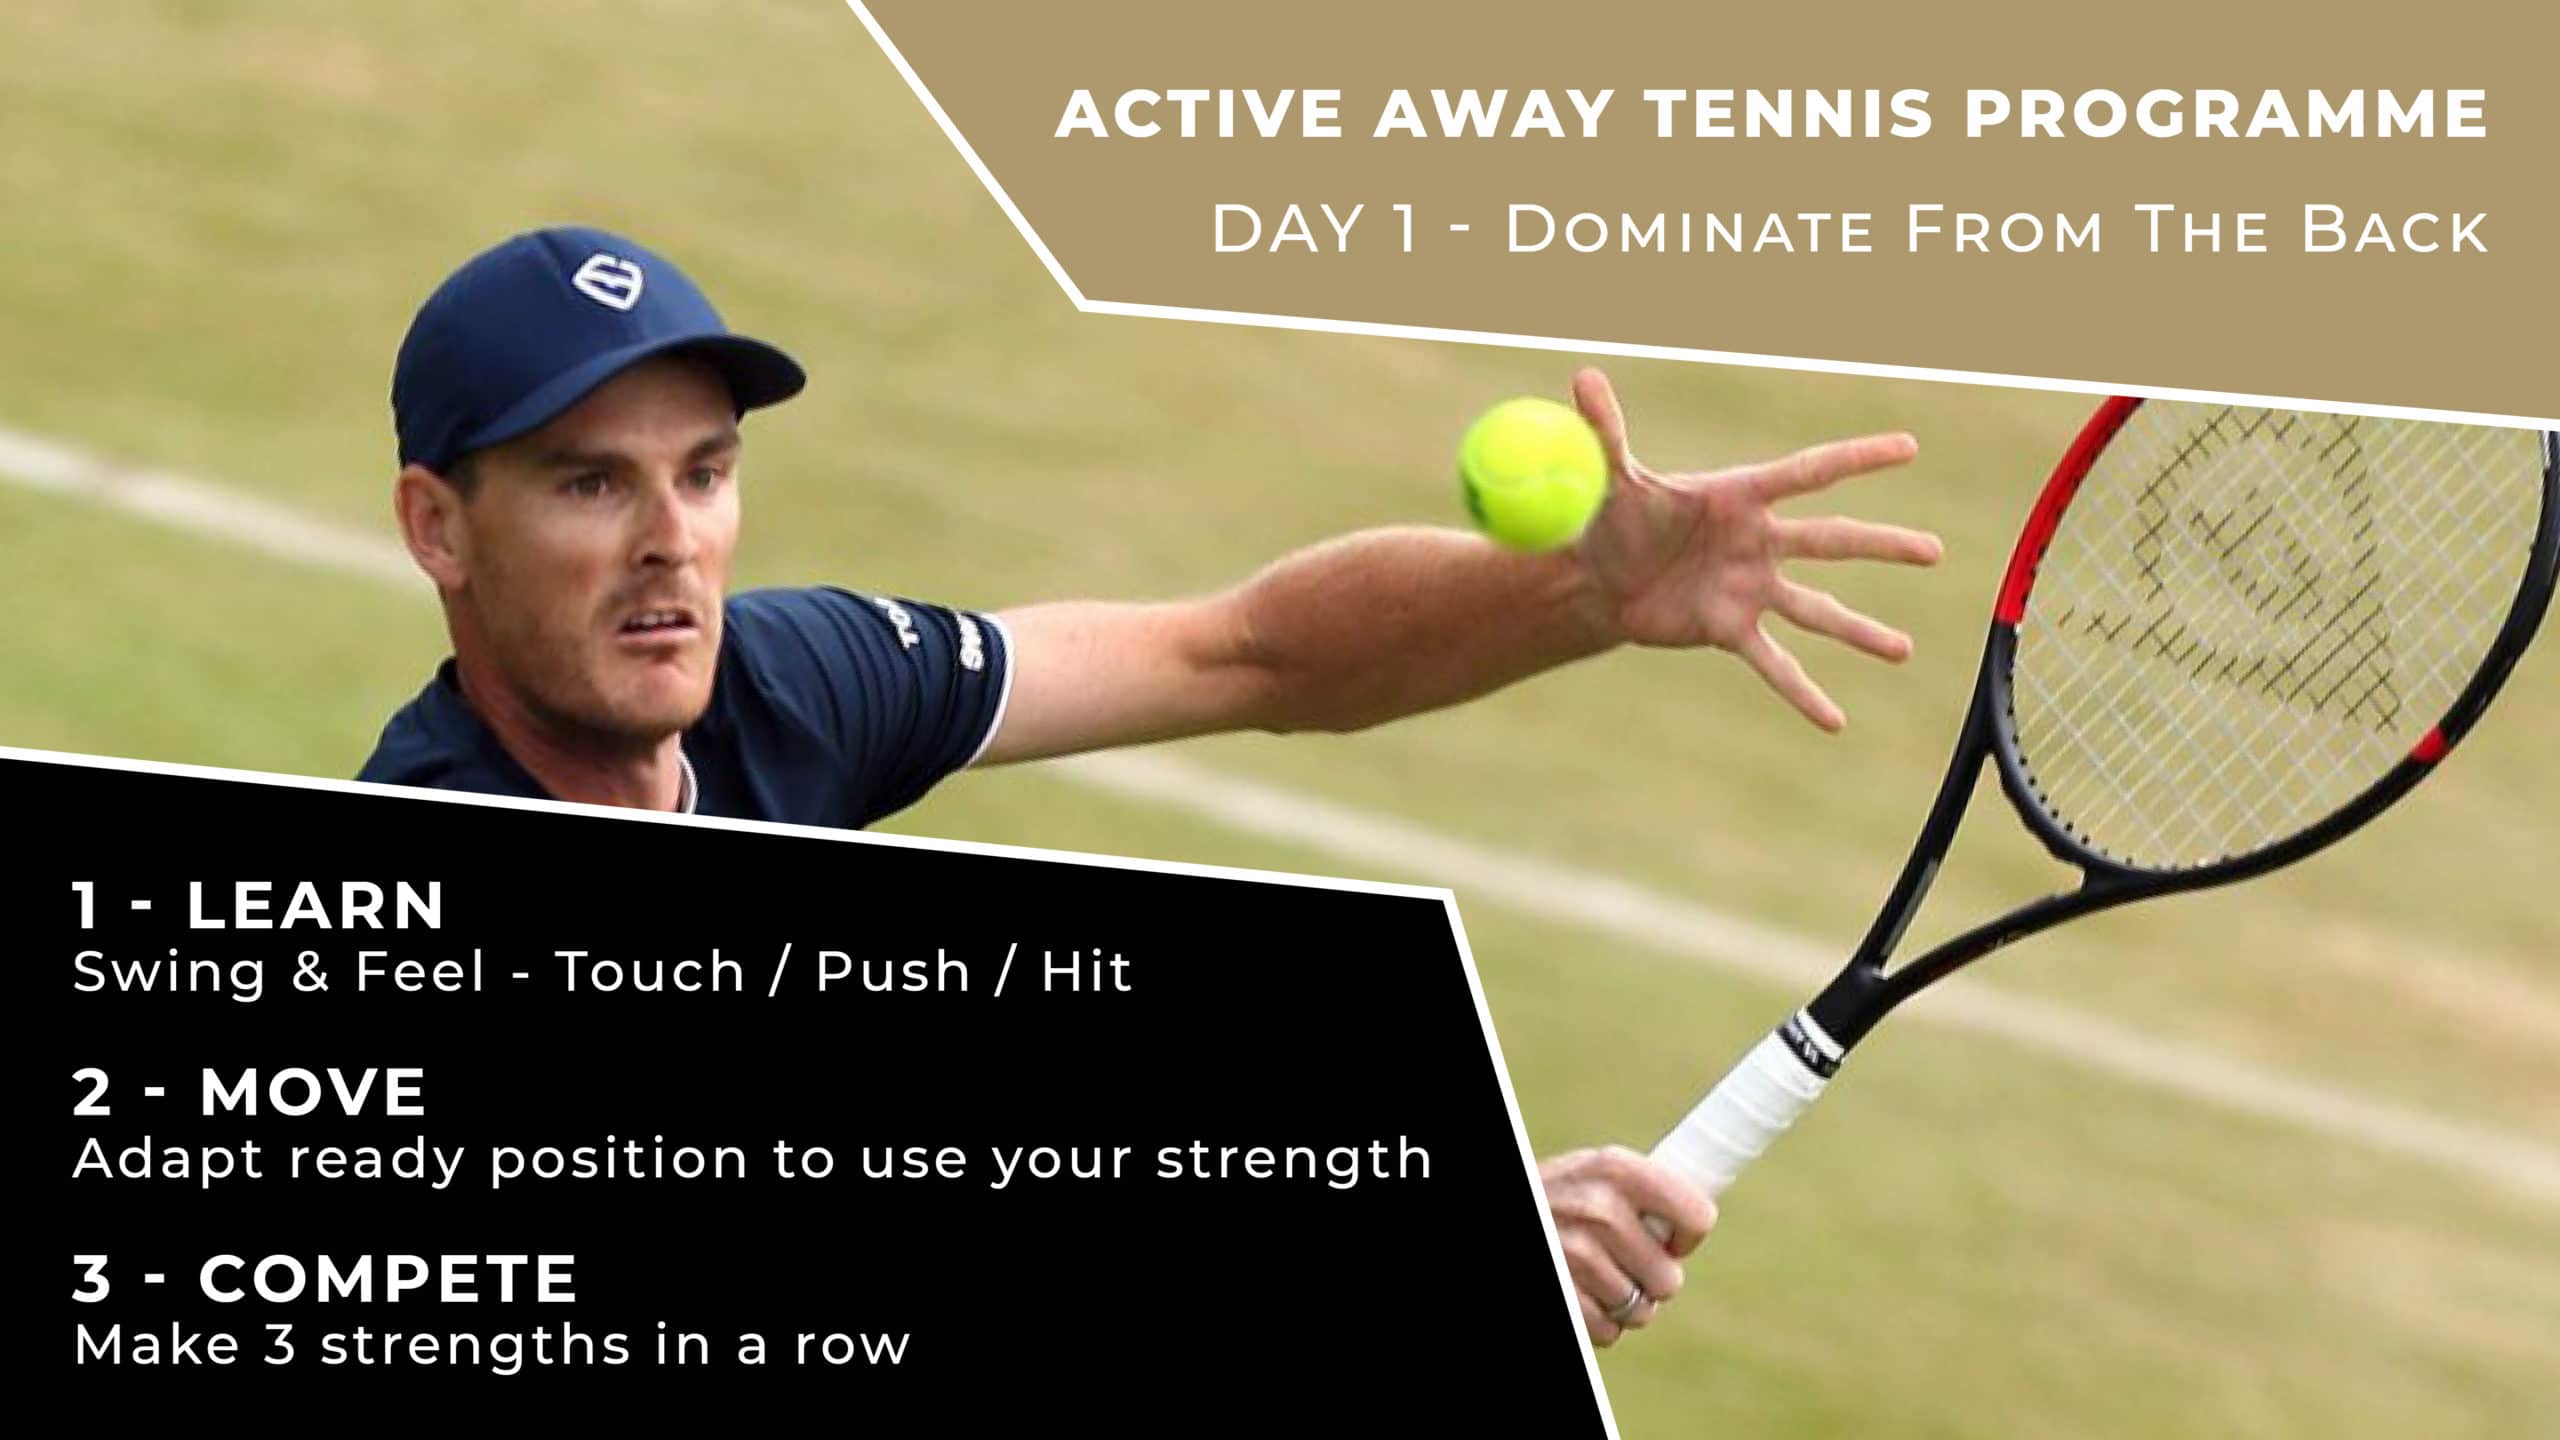 Day 1 - Dominate from the Back | Active Away Tennis Programme